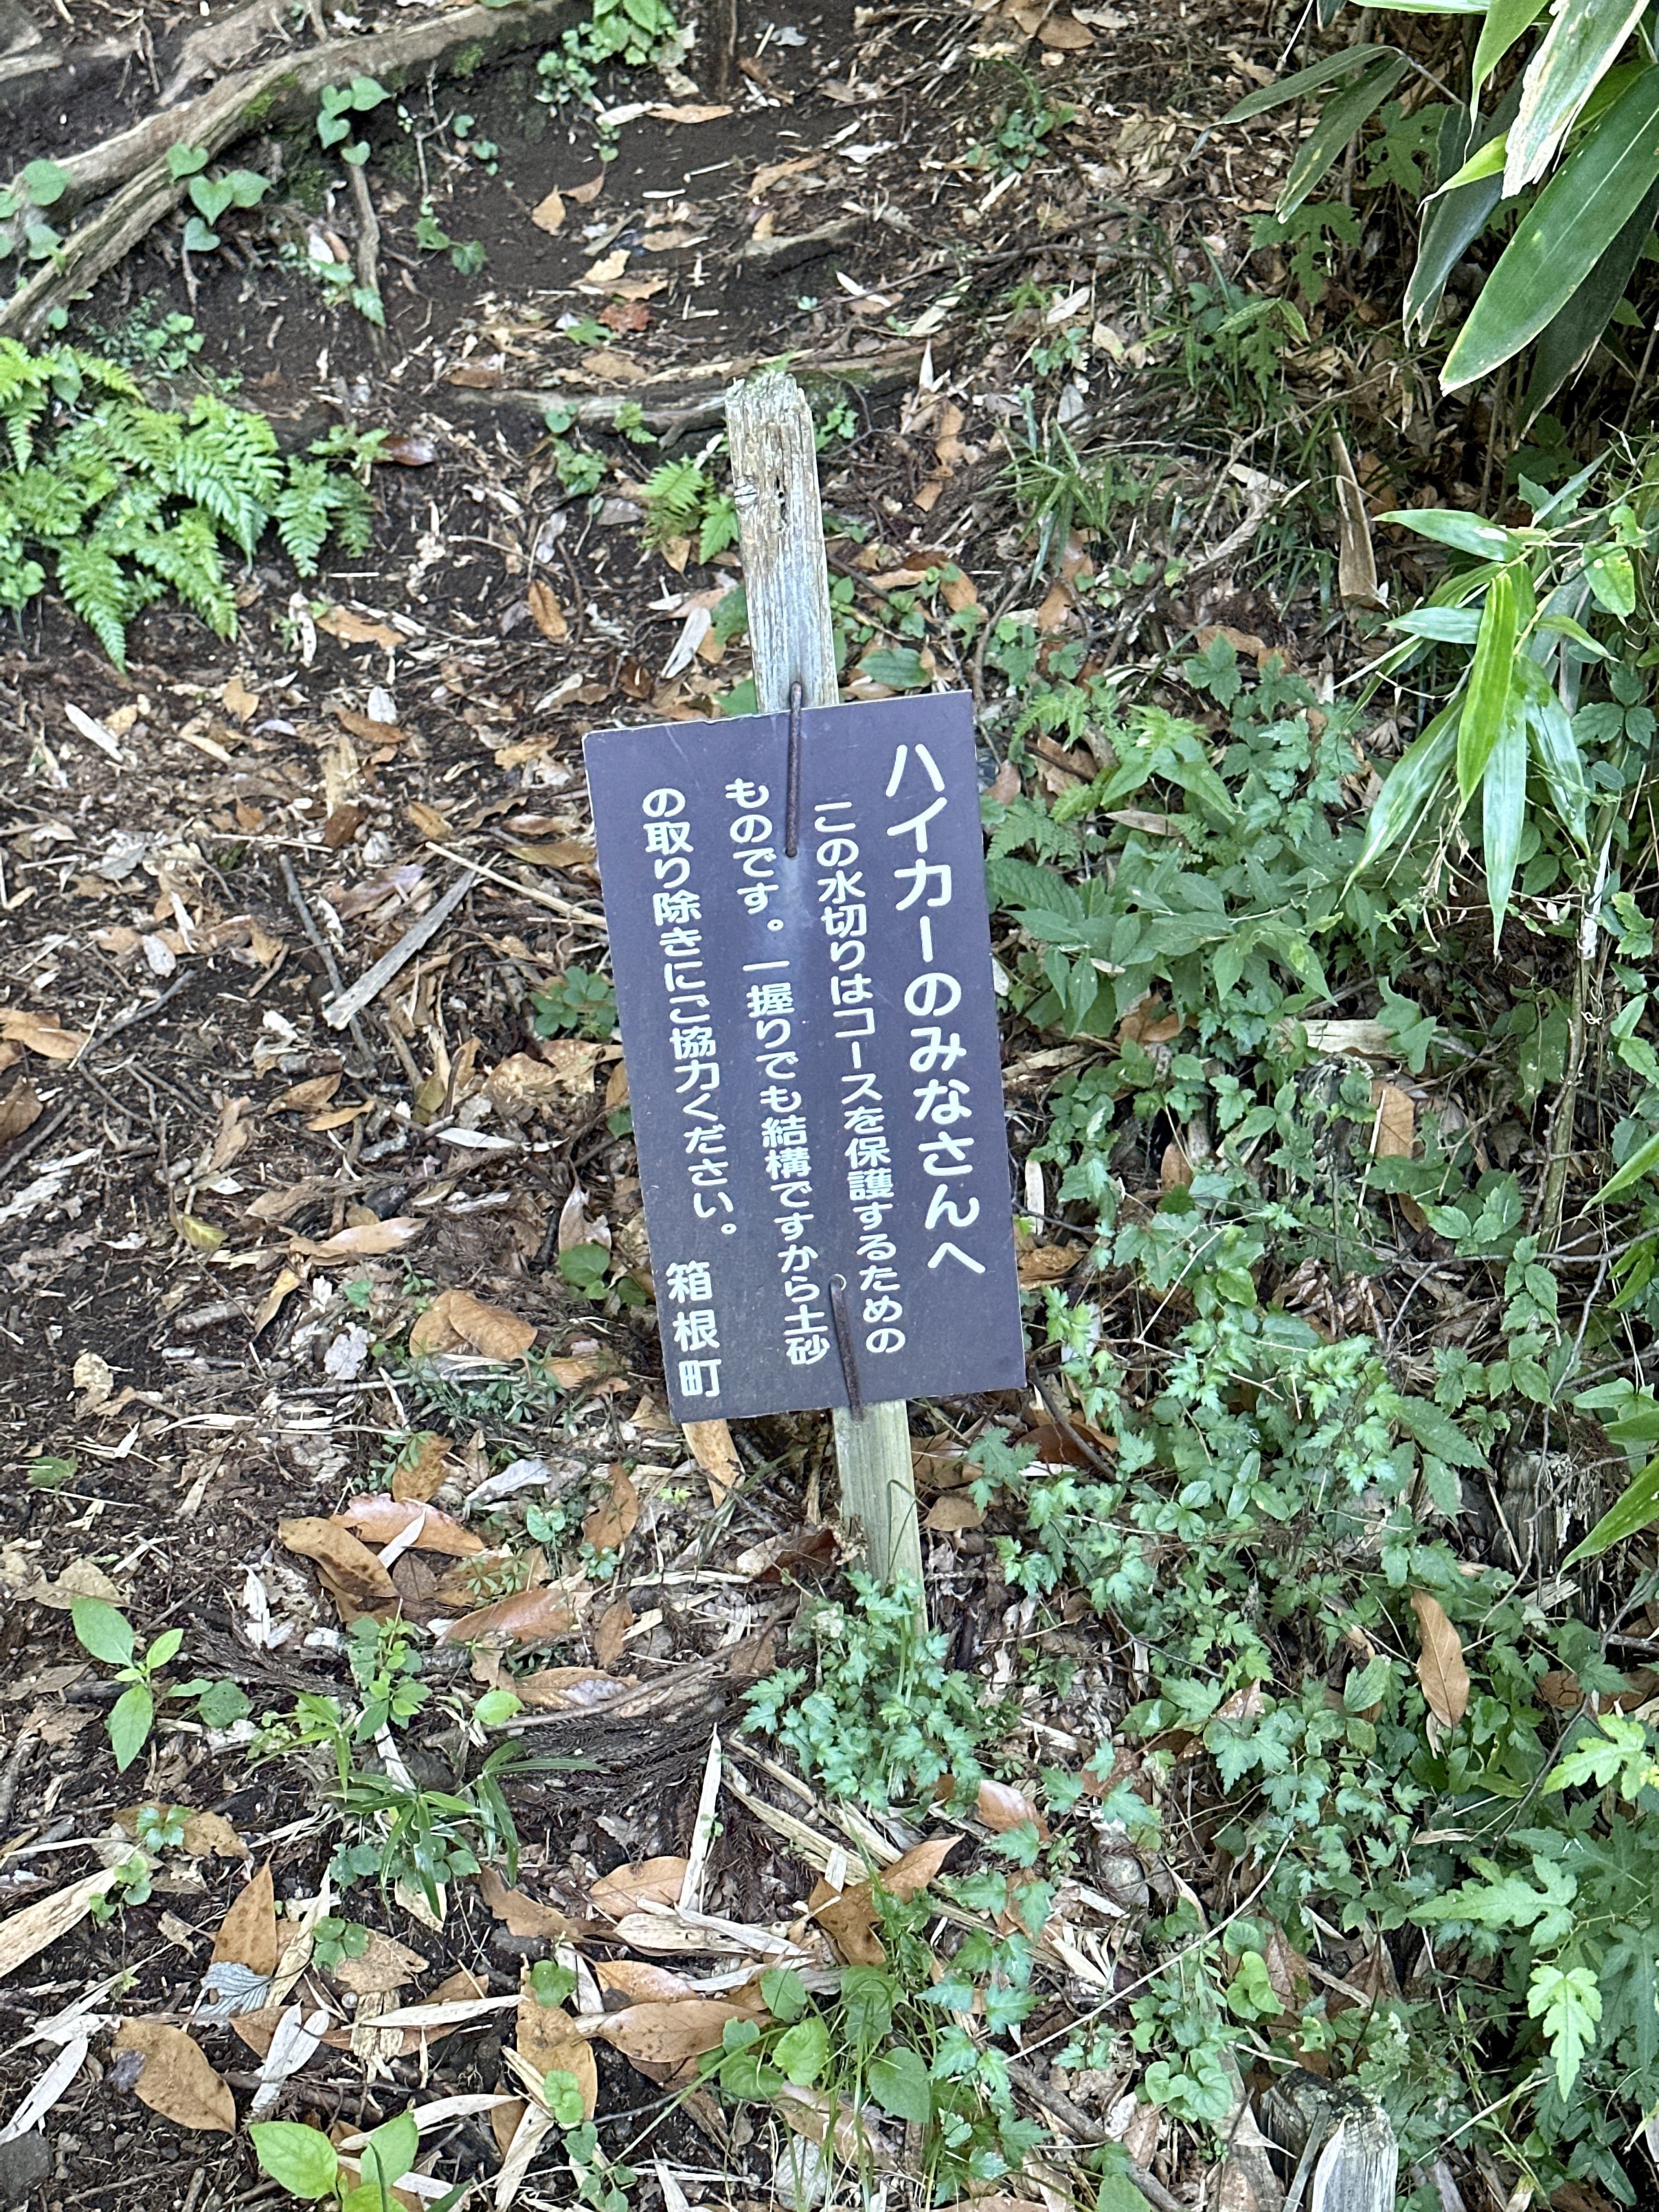 Sign on Hakone hiking trail asking hikers to clear "even one handful" of dirt from the water channels cut across the trail.